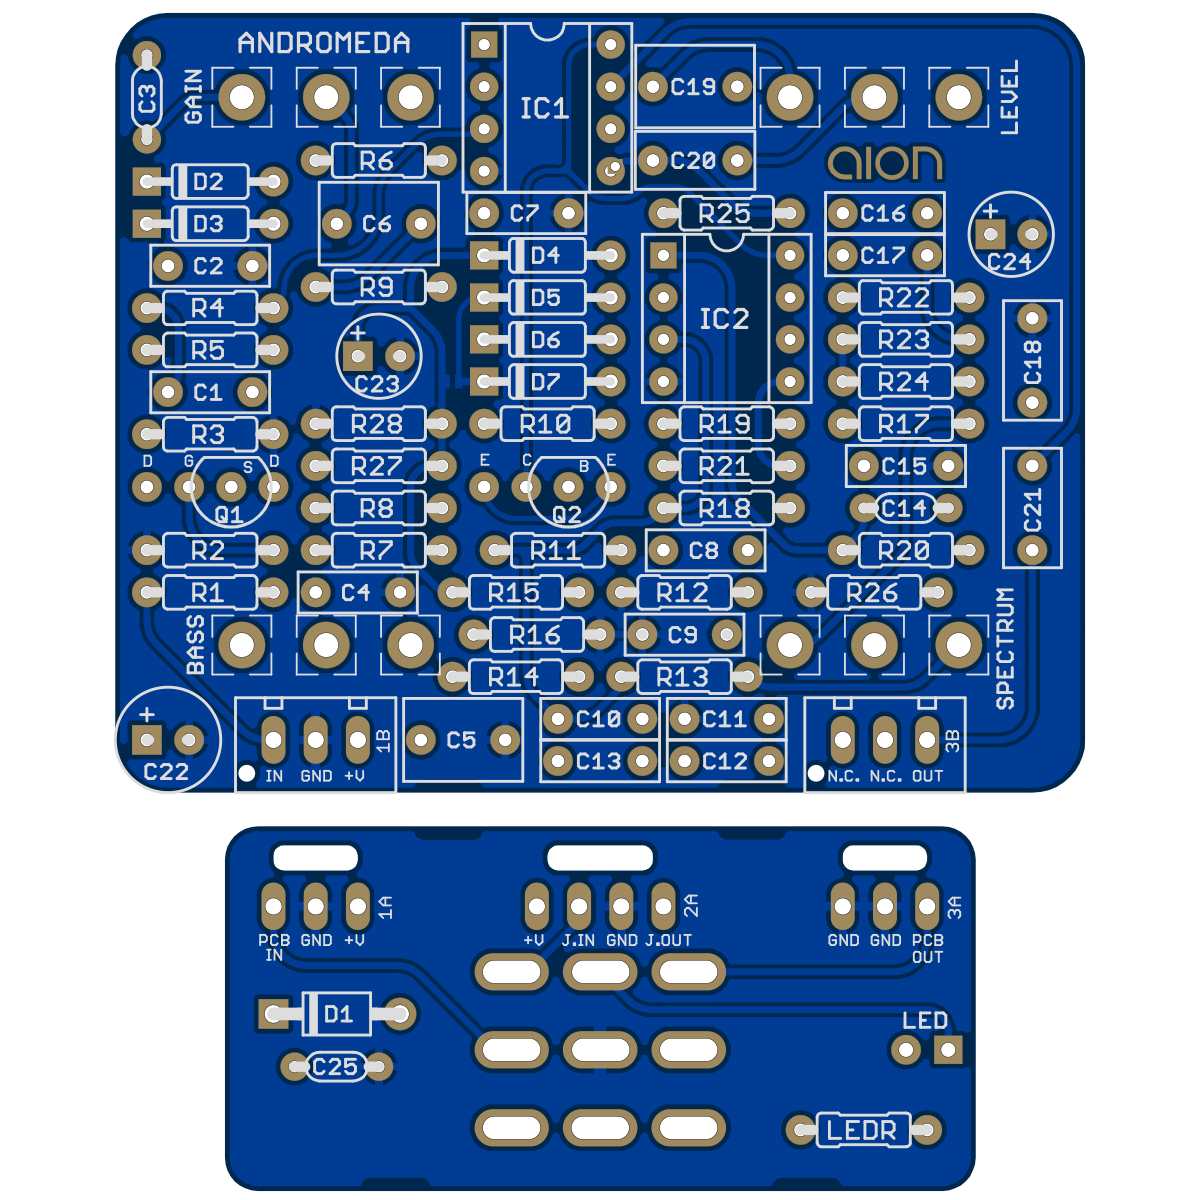 https://aionfx.com/app/files/projects/andromeda-overdrive-pcb.png